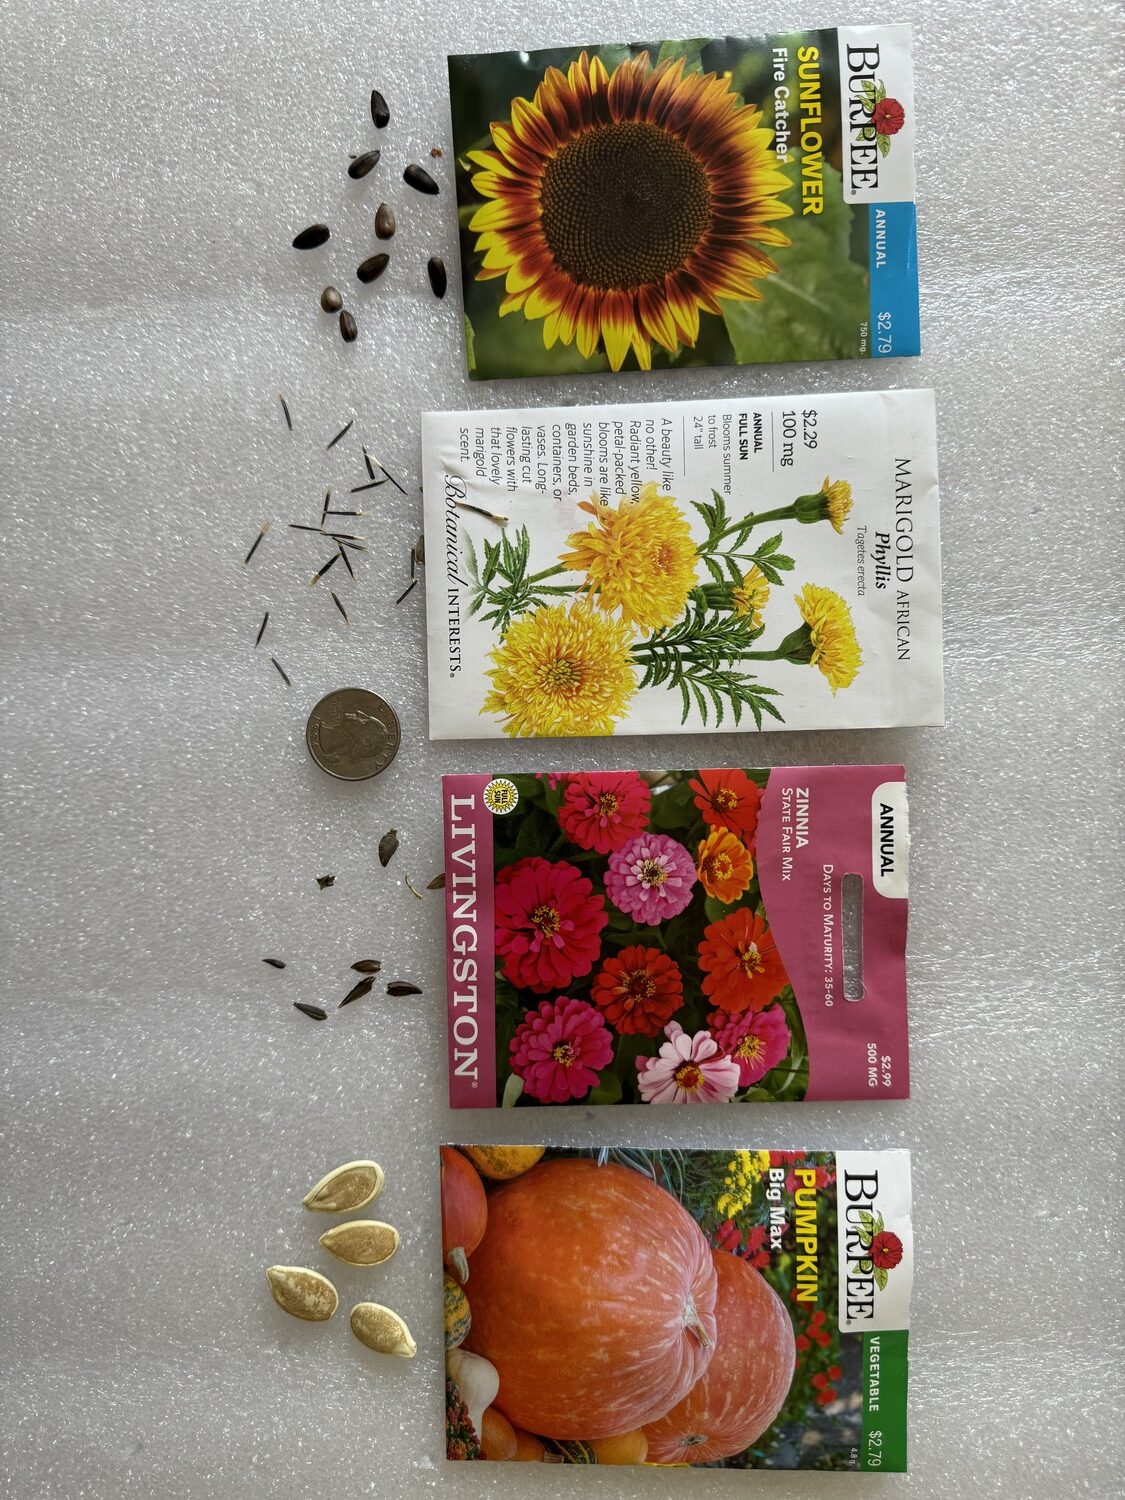 Seeds of marigolds, zinnias, pumpkins and sunflowers are large enough for most kids to handle one at a time. The marigolds may be the most challenging to handle while the pumpkin and sunflower seeds are the largest and easiest for small finger.   The quarter is for size reference. ANDREW MESSINGER